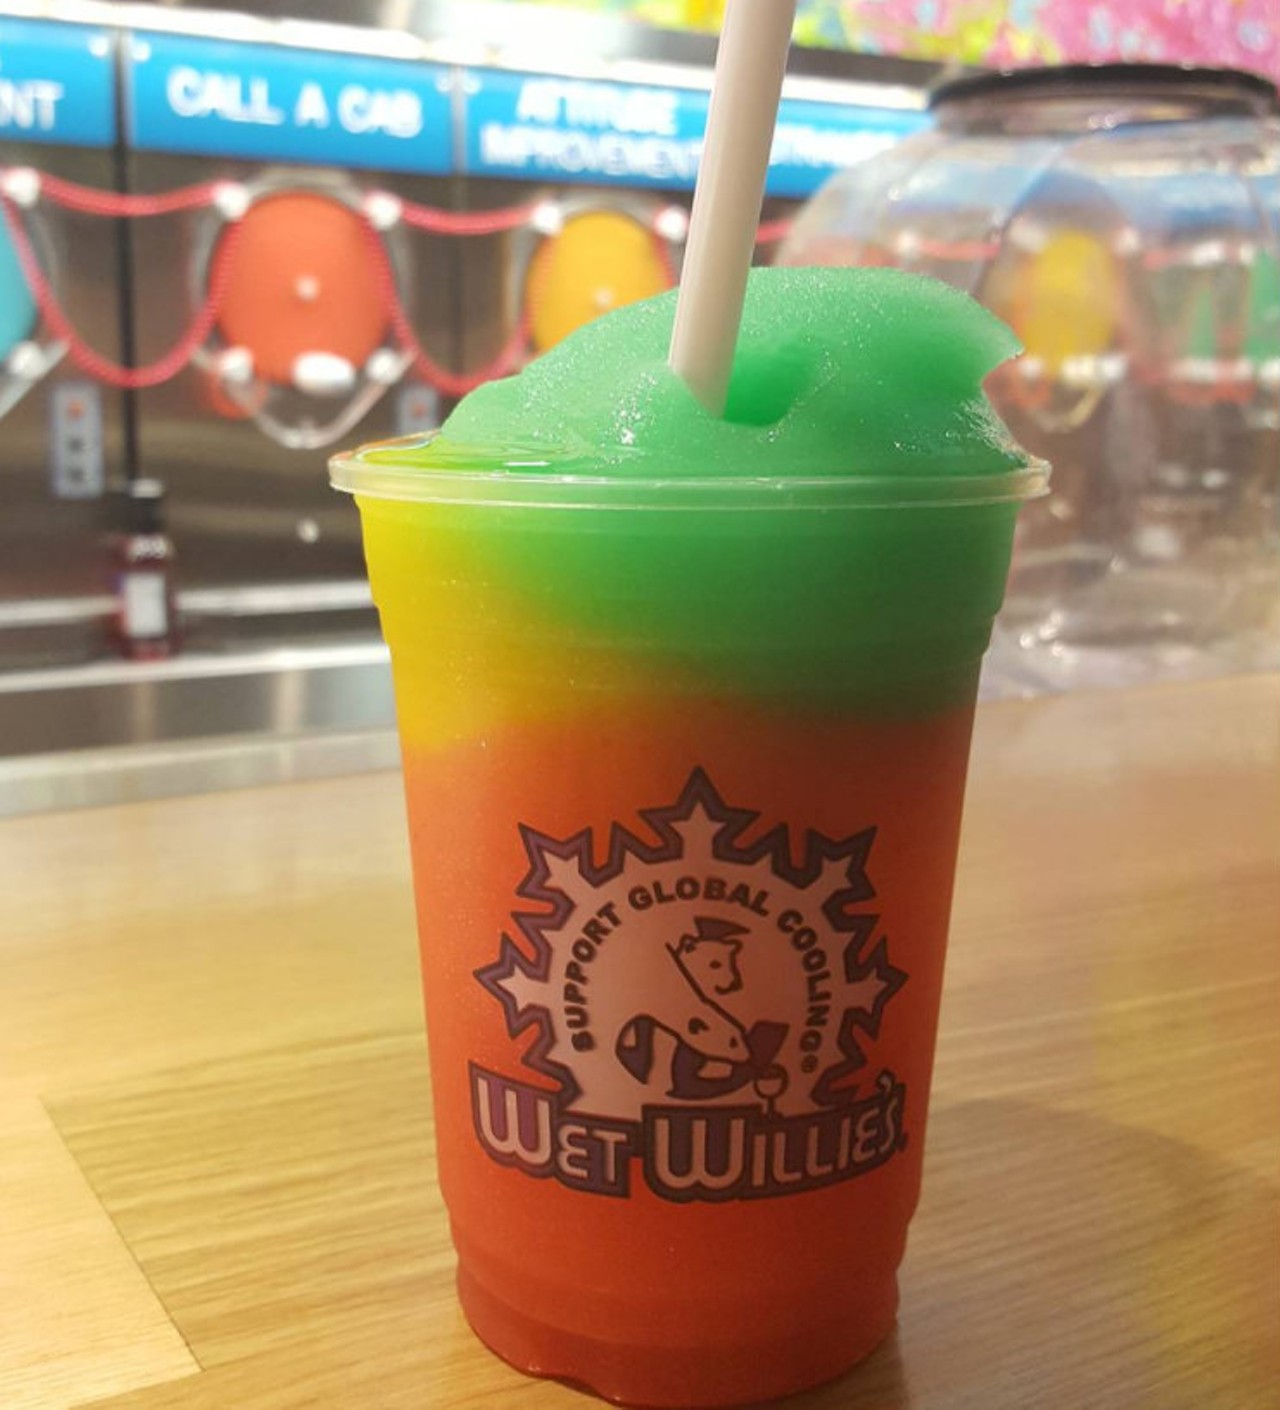 Wet Willies
999 N. 2nd St, St. Louis, MO 63102
Snow cones aren&#146;t just for the kids. For the 21+ crowd, Wet Willies offers 18 alcoholic slushy drinks. Photo courtesy of Instagram / a_nathania.